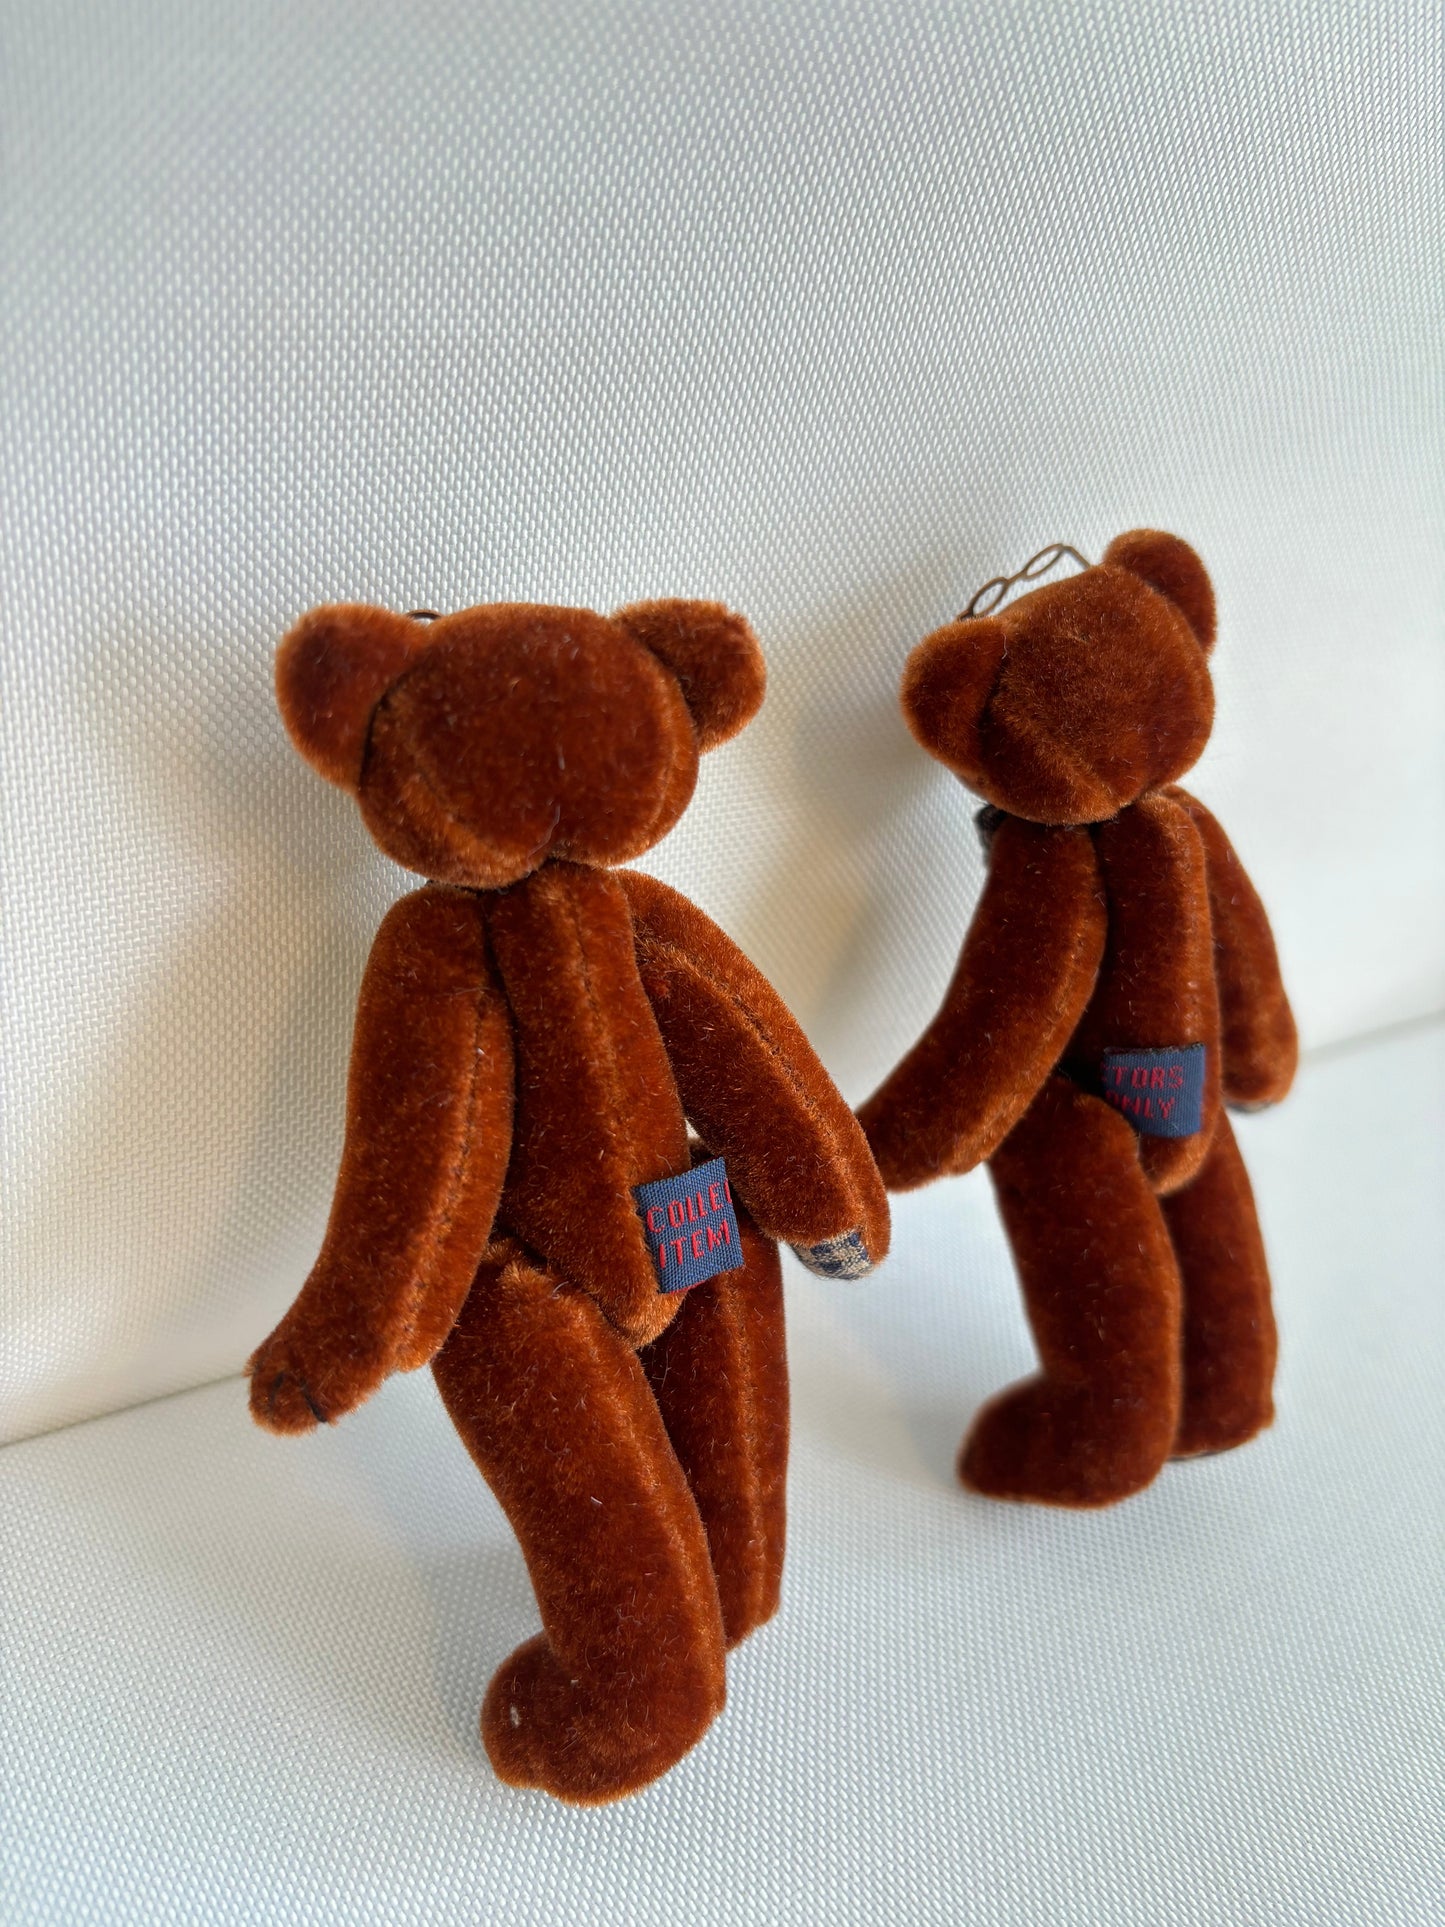 Boyd Hand Made Collectable 4 inch Jointed Teddy Bear Figures Brown (Pair - Mr and Mrs)